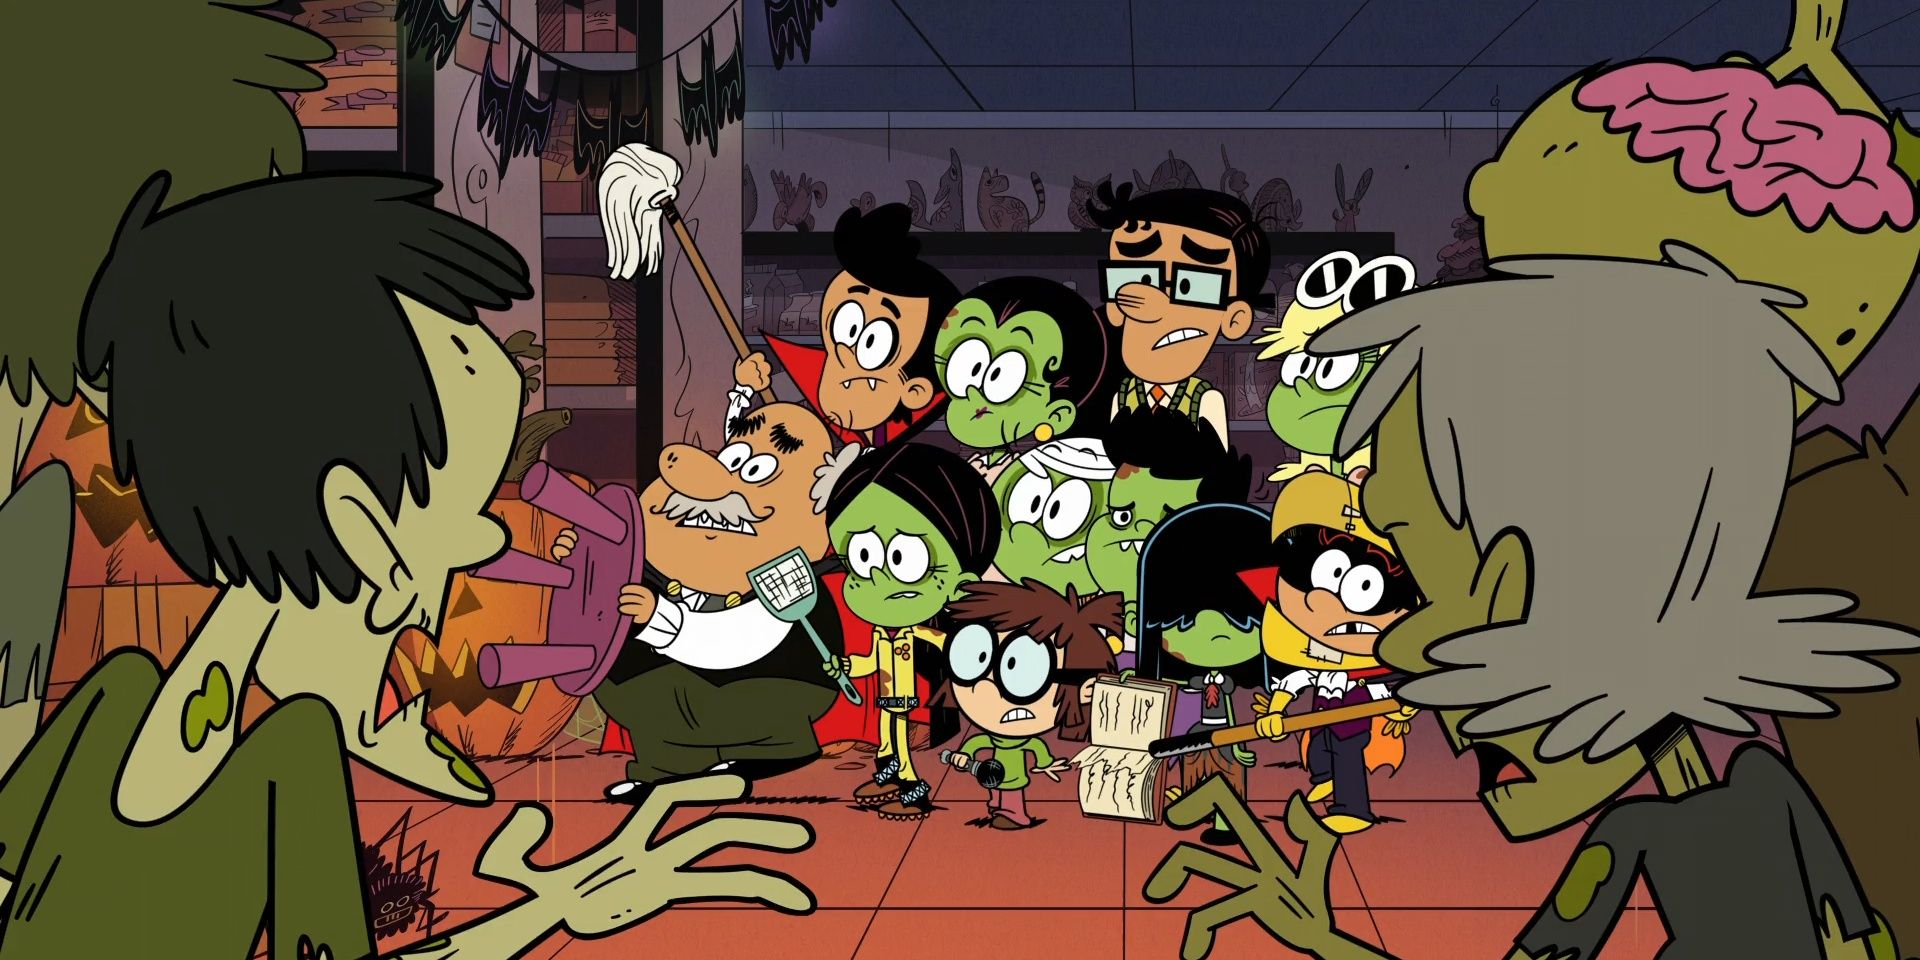 An image of the Casagrande family with some characters from the Loud House